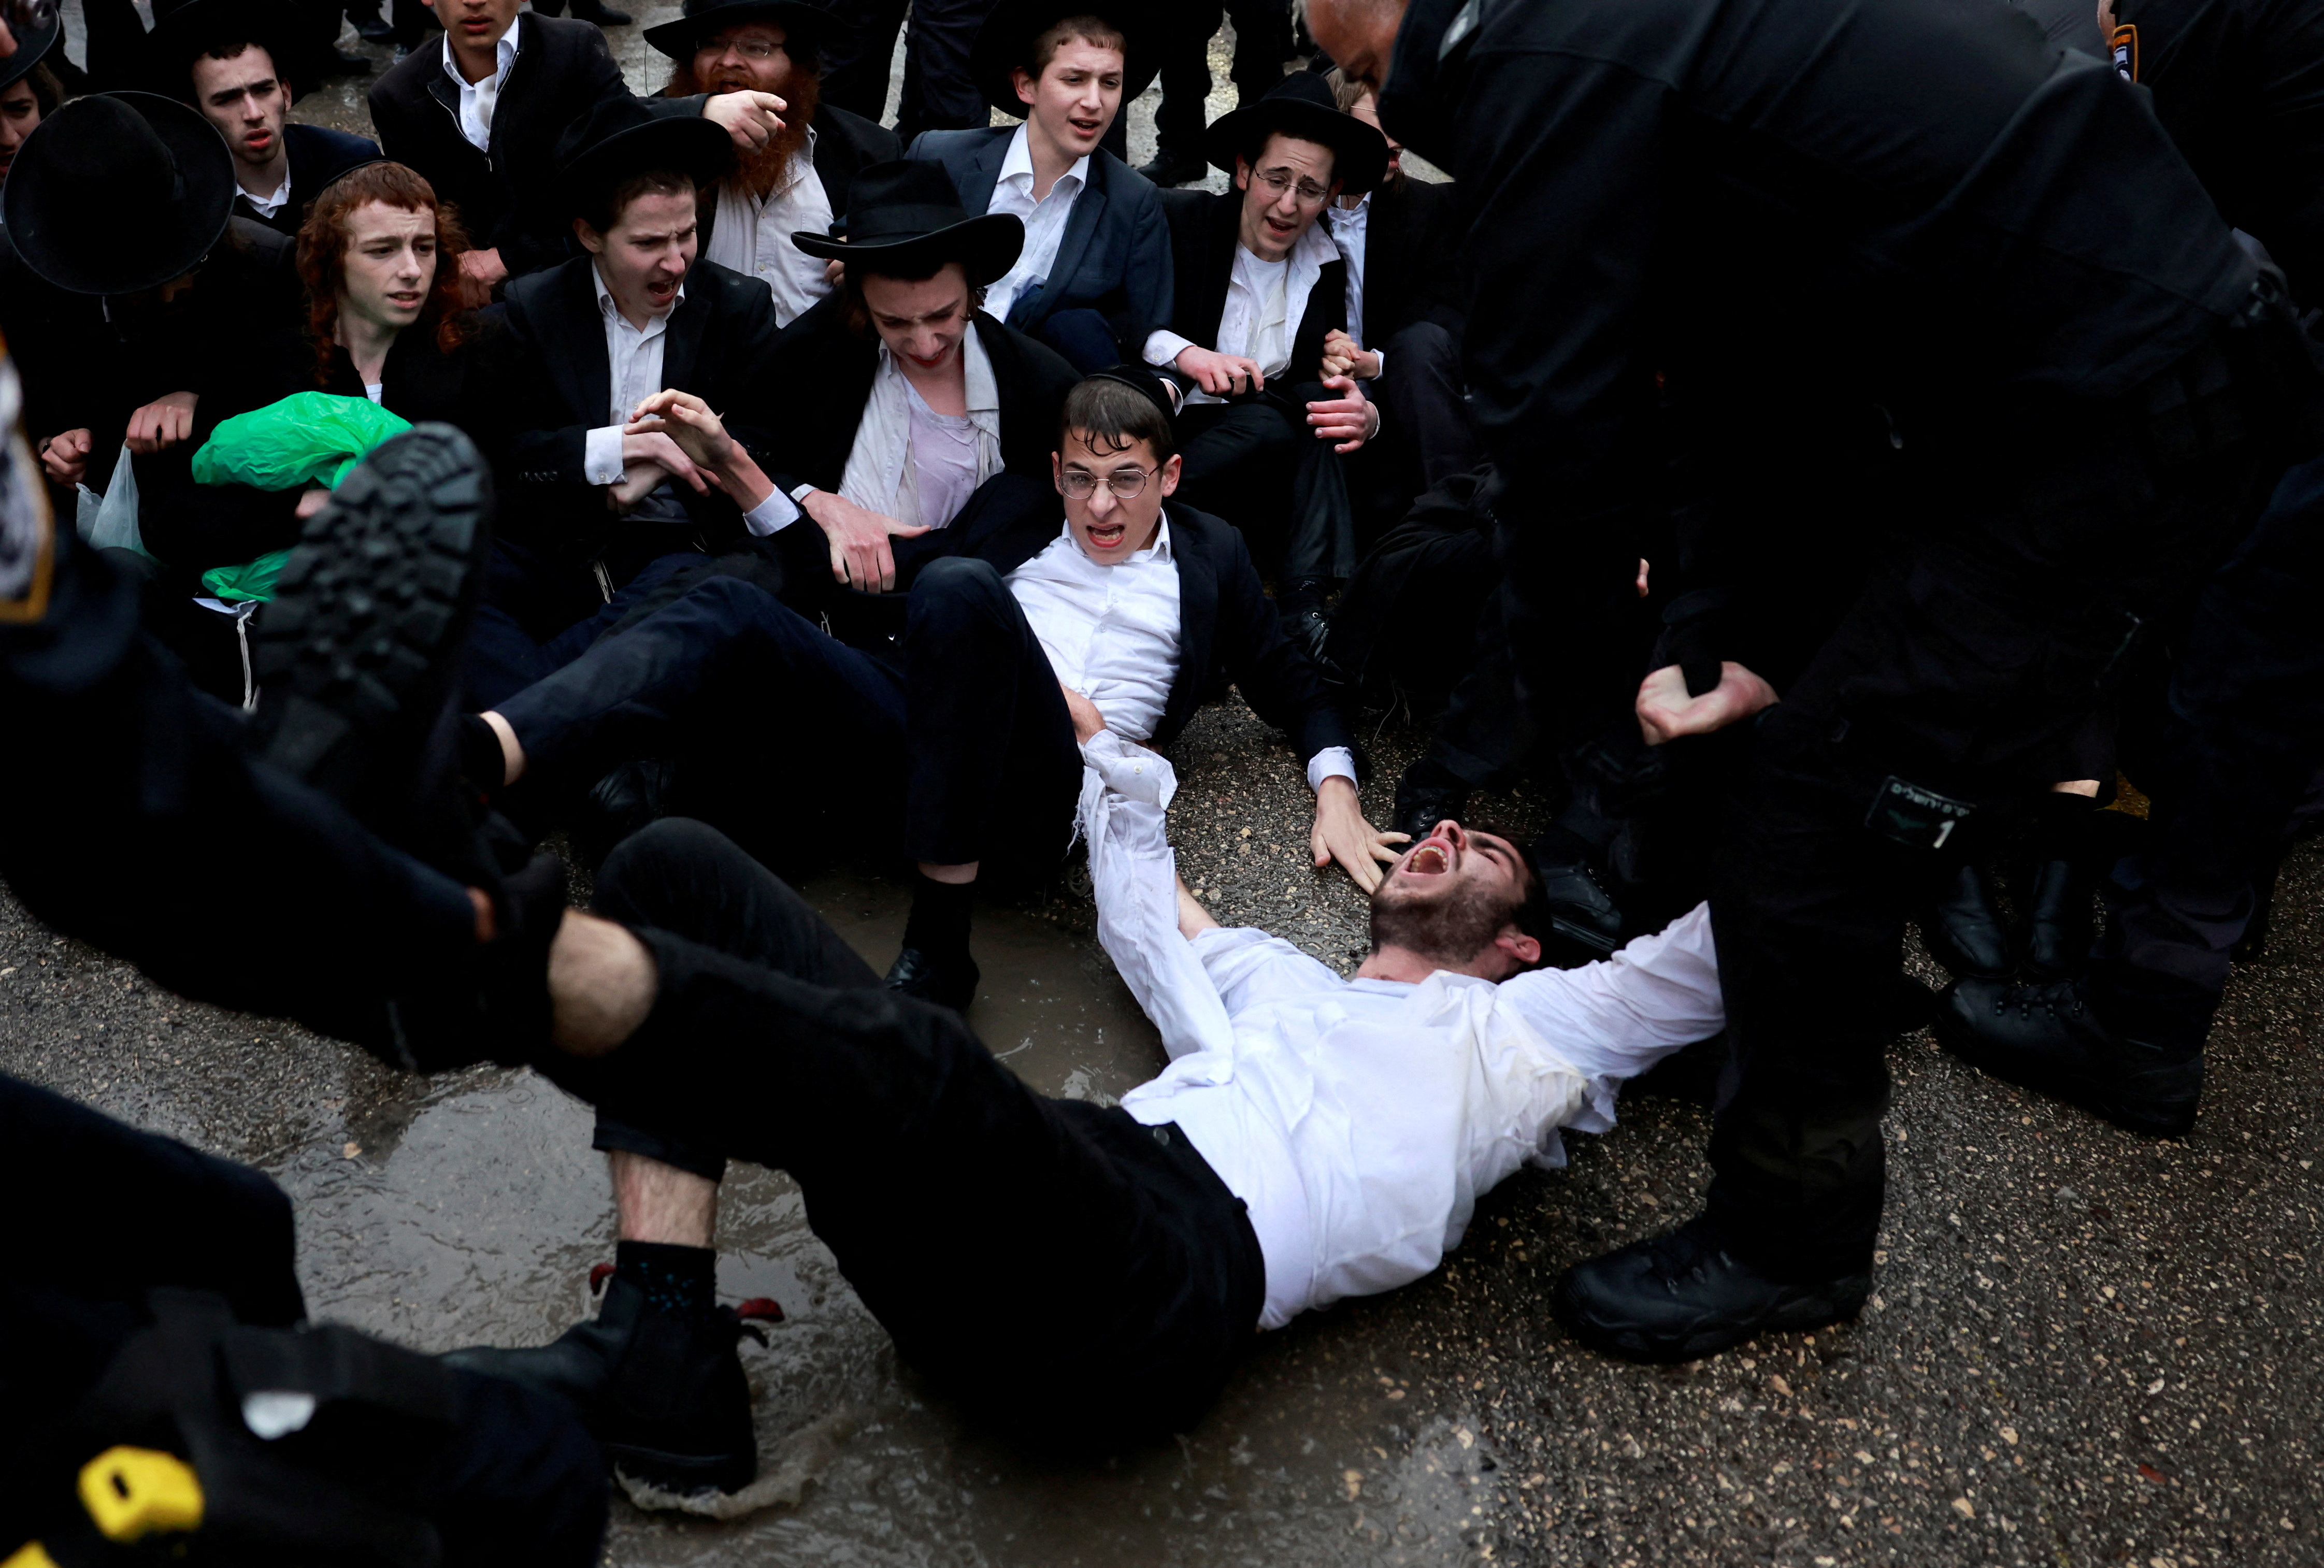 Protest against attempts to change government policy that grants ultra-Orthodox Jews exemptions from military conscription, in Jerusalem